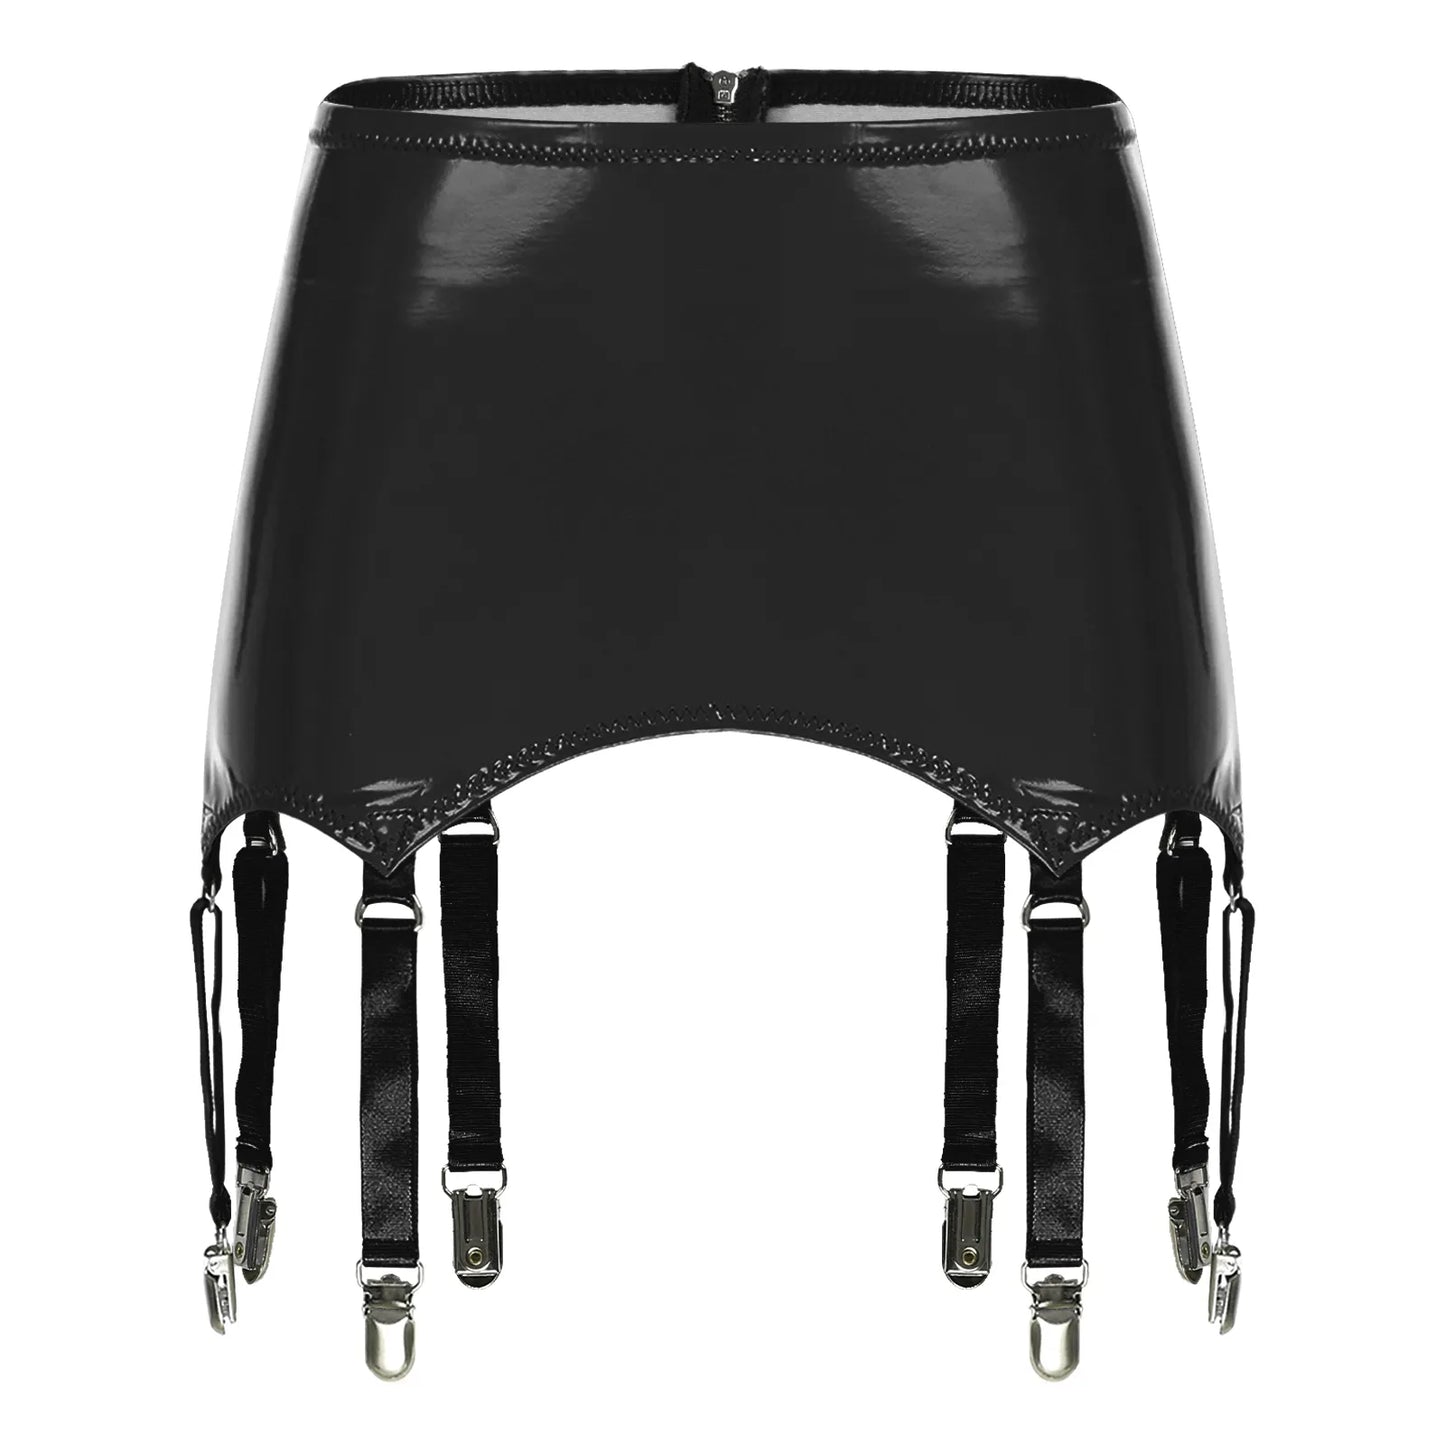 Hip Hot- the Patent Vinyl Girdle with Garters